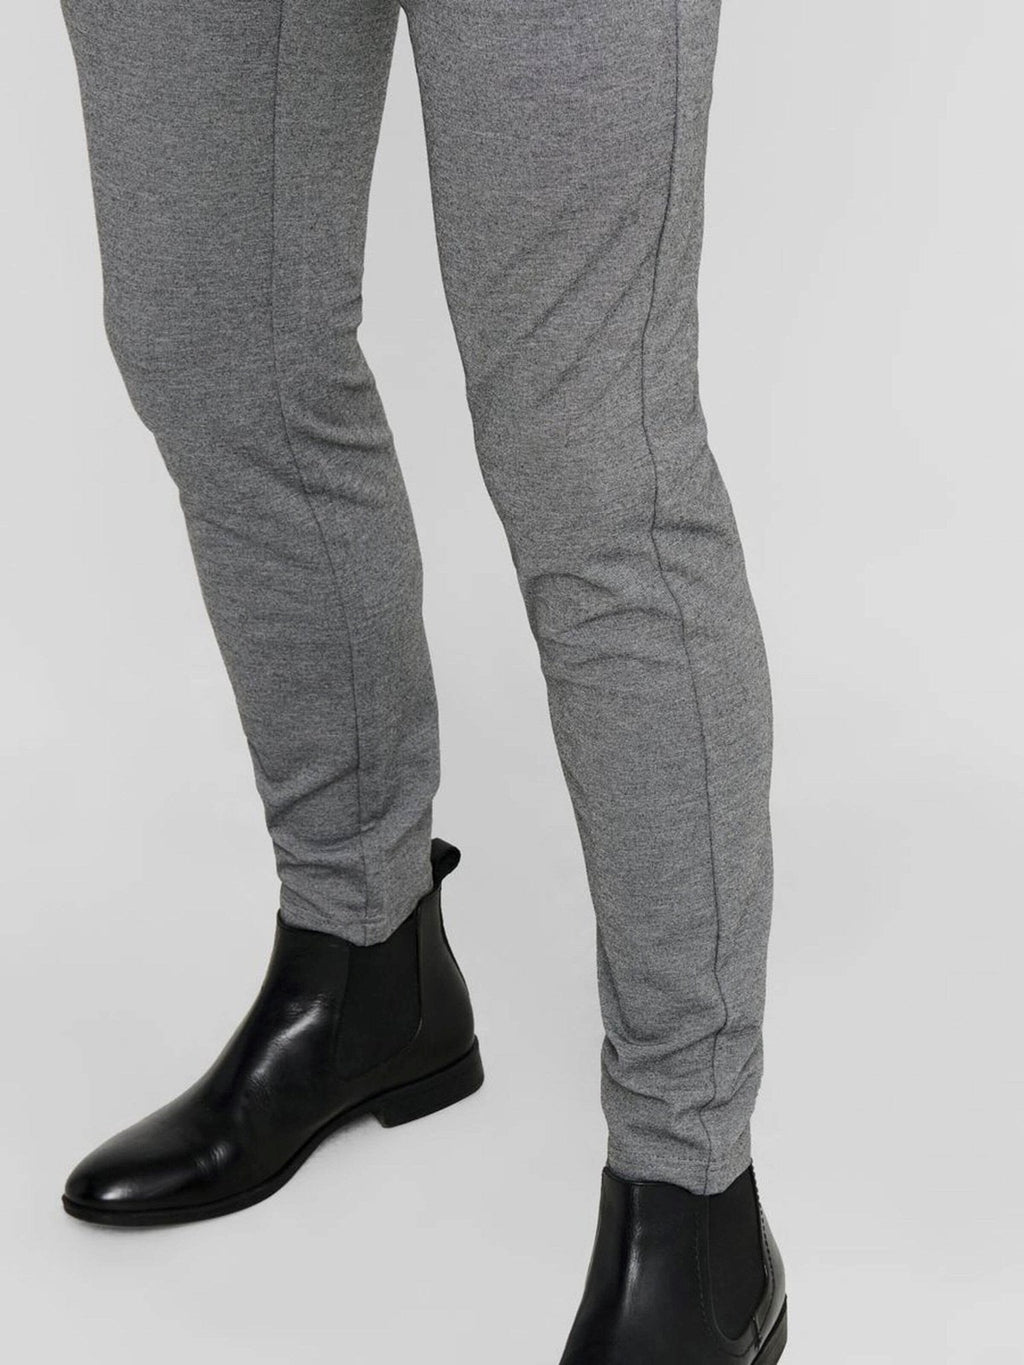 Mark Trousers - Light grey (stretch trousers)